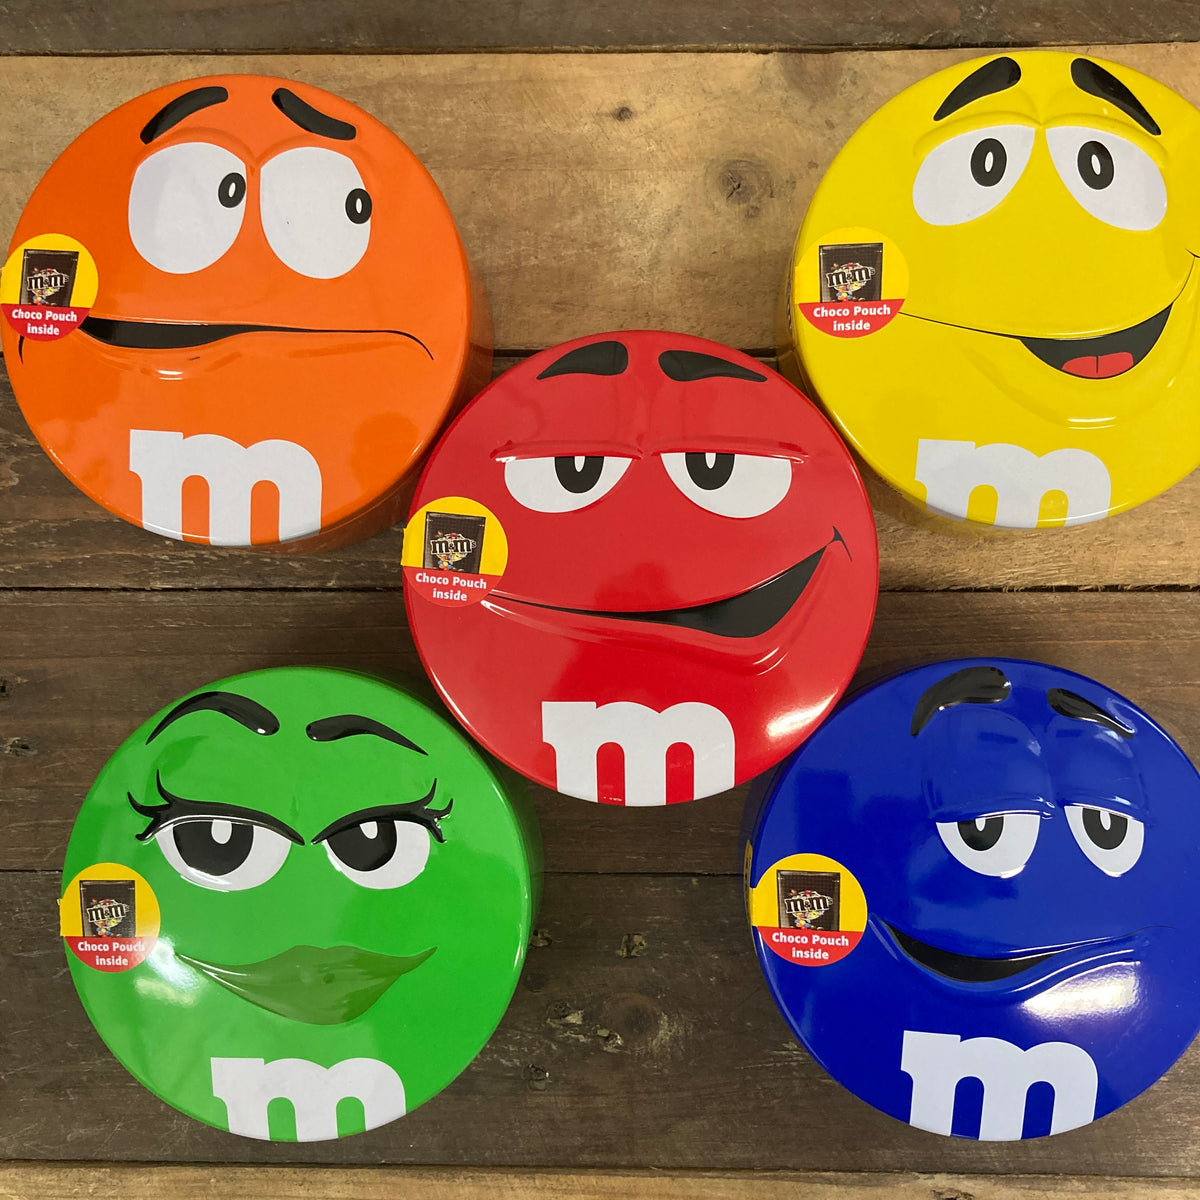 Explore 2x M&M's Chocolate tins (2x200g) M&M's X and More. You can save  money shopping in our store